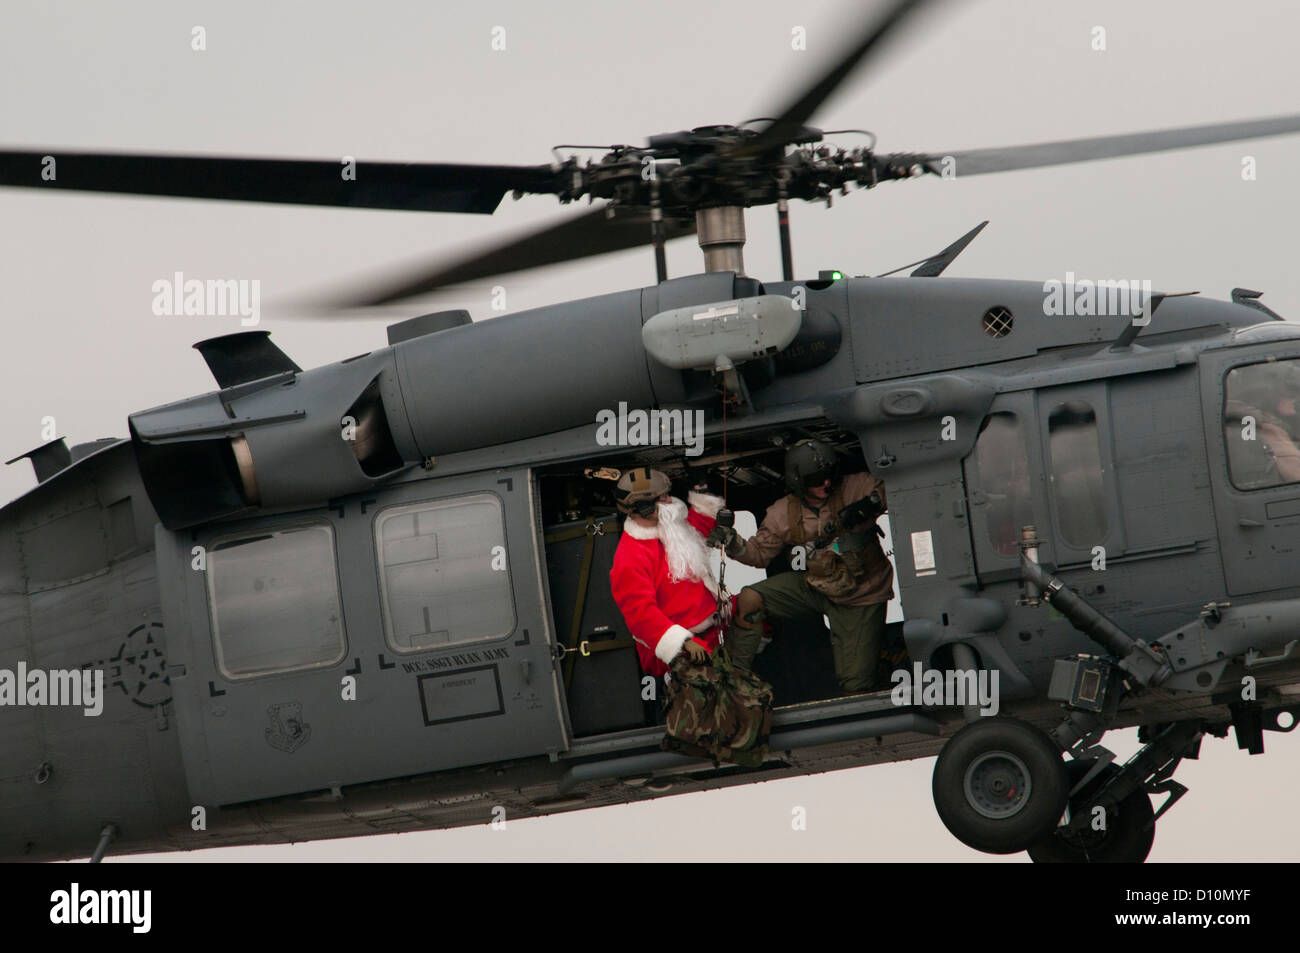 Santa Claus, a North Pole native, to be lowered to the ground from an HH-60G Pave Hawk Stock Photo